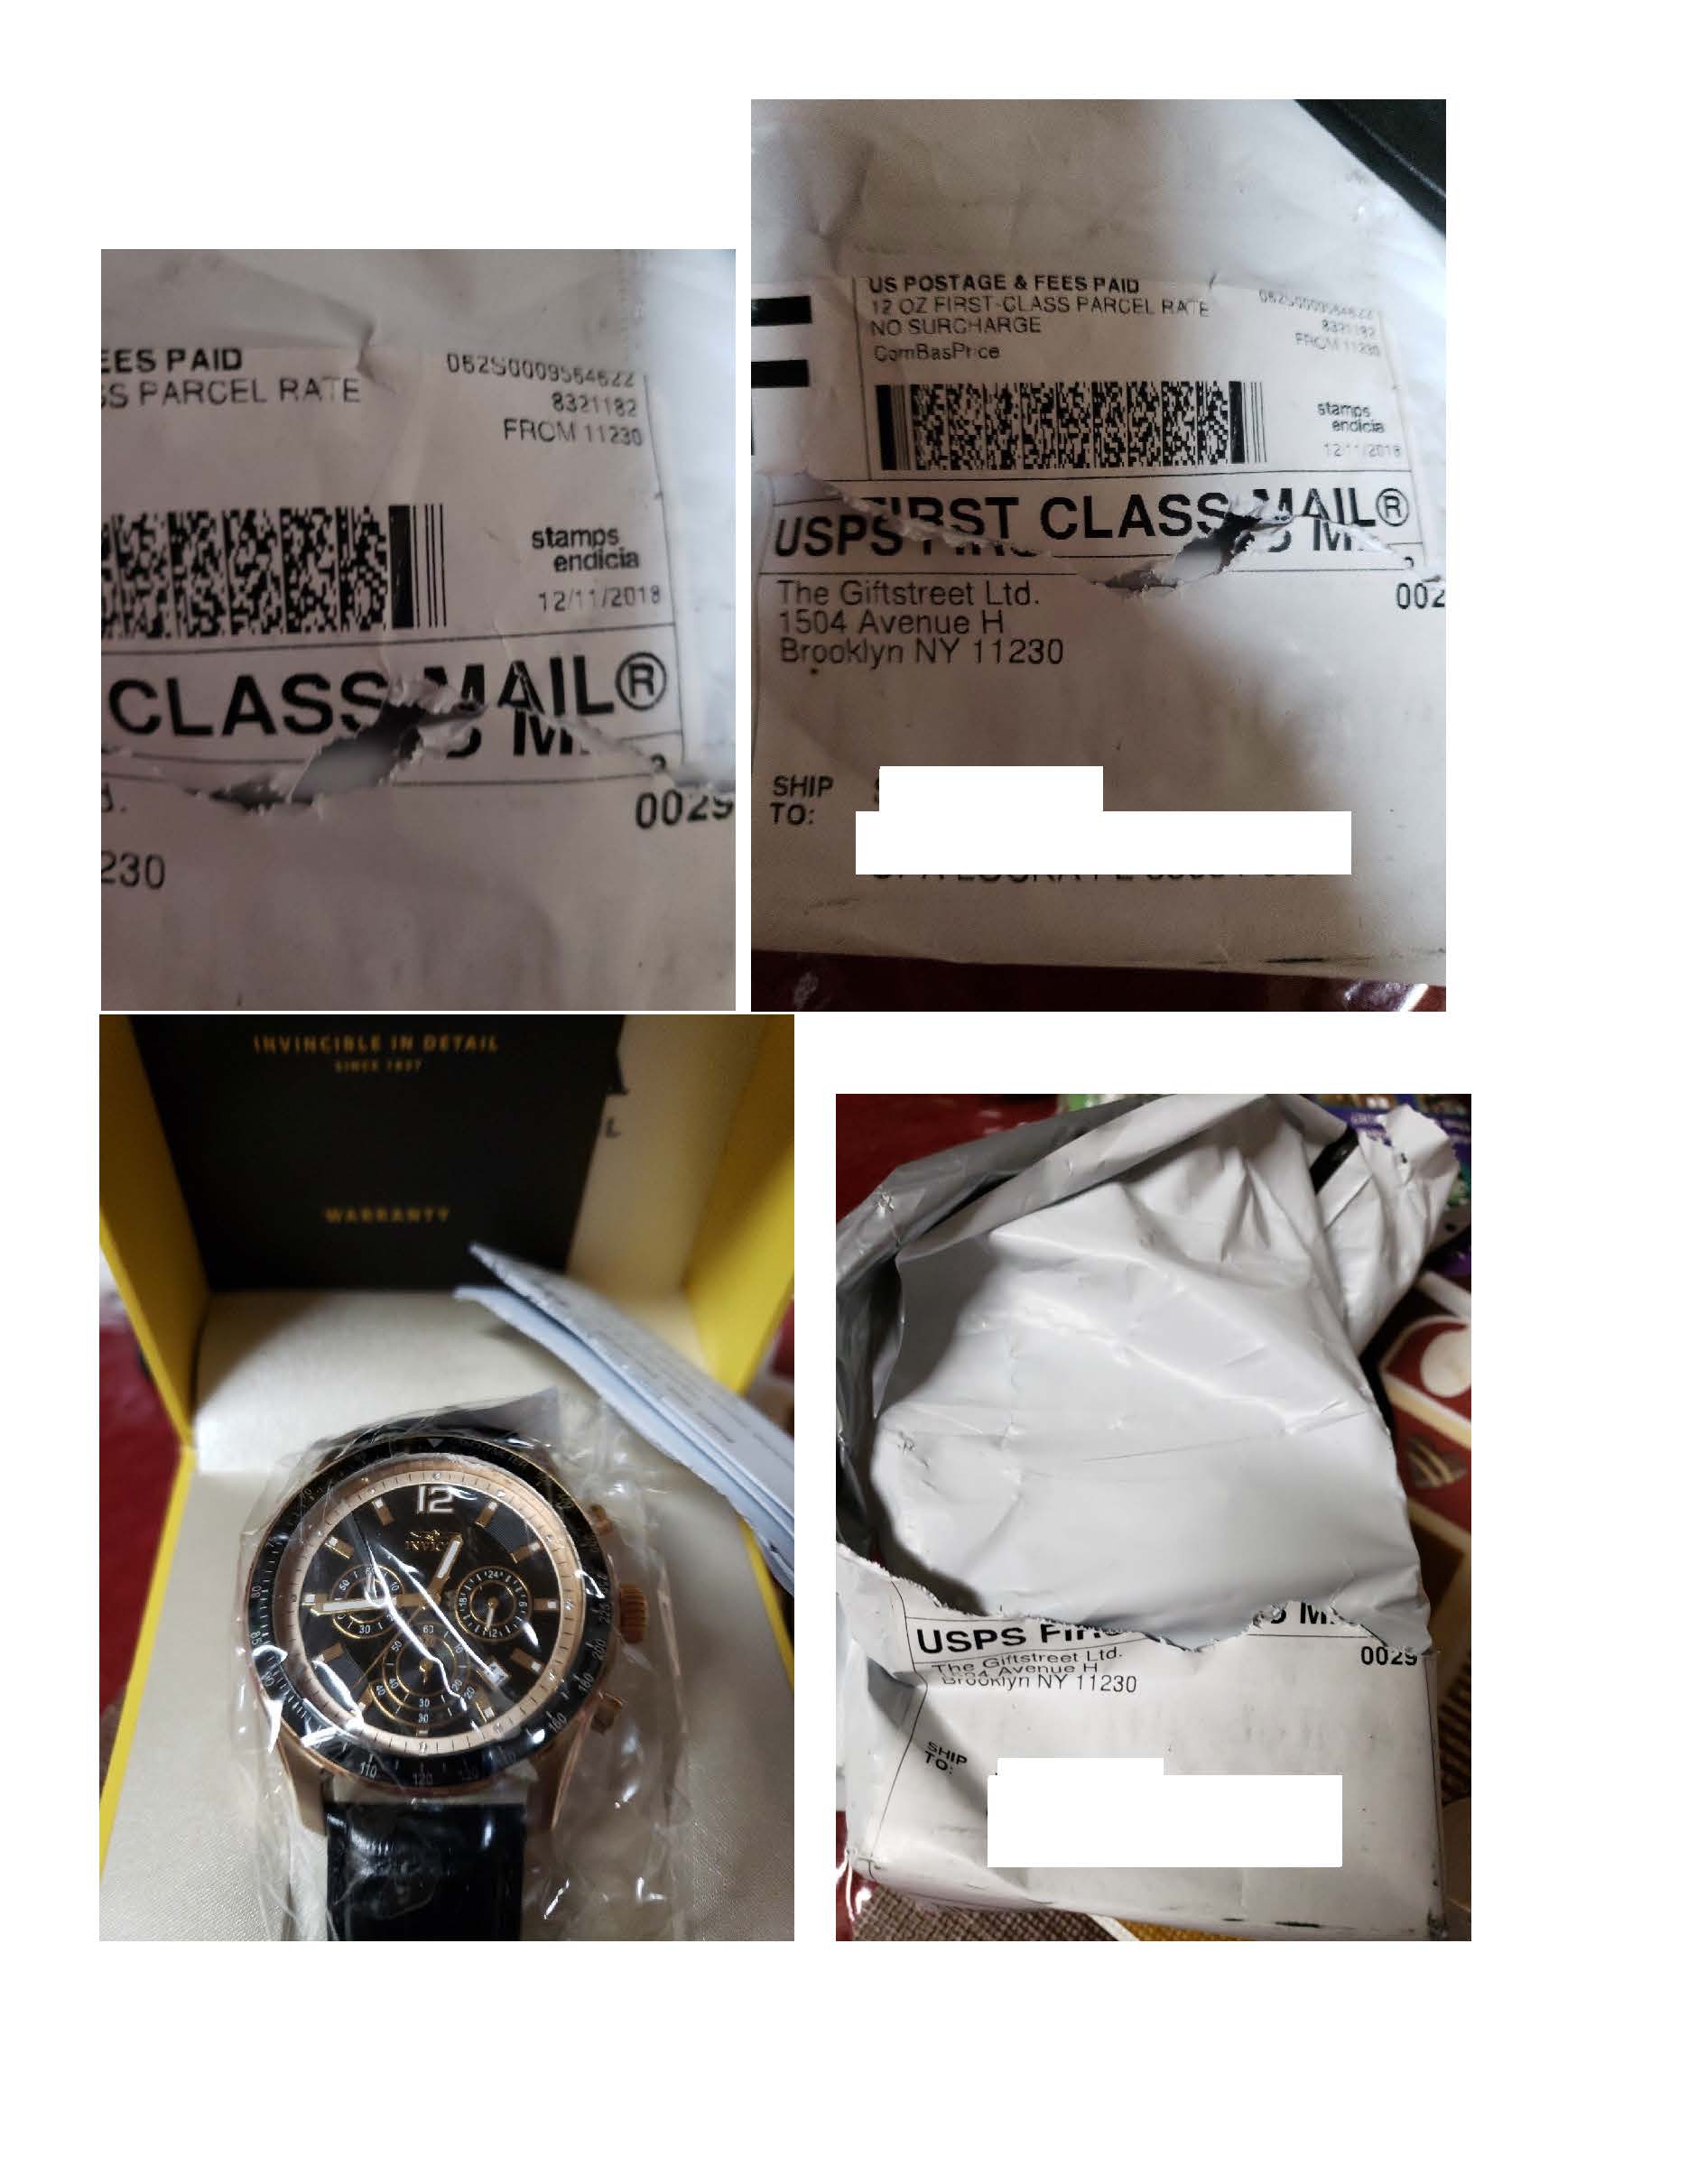 Proof that only one watch was delivered 12.21.18 